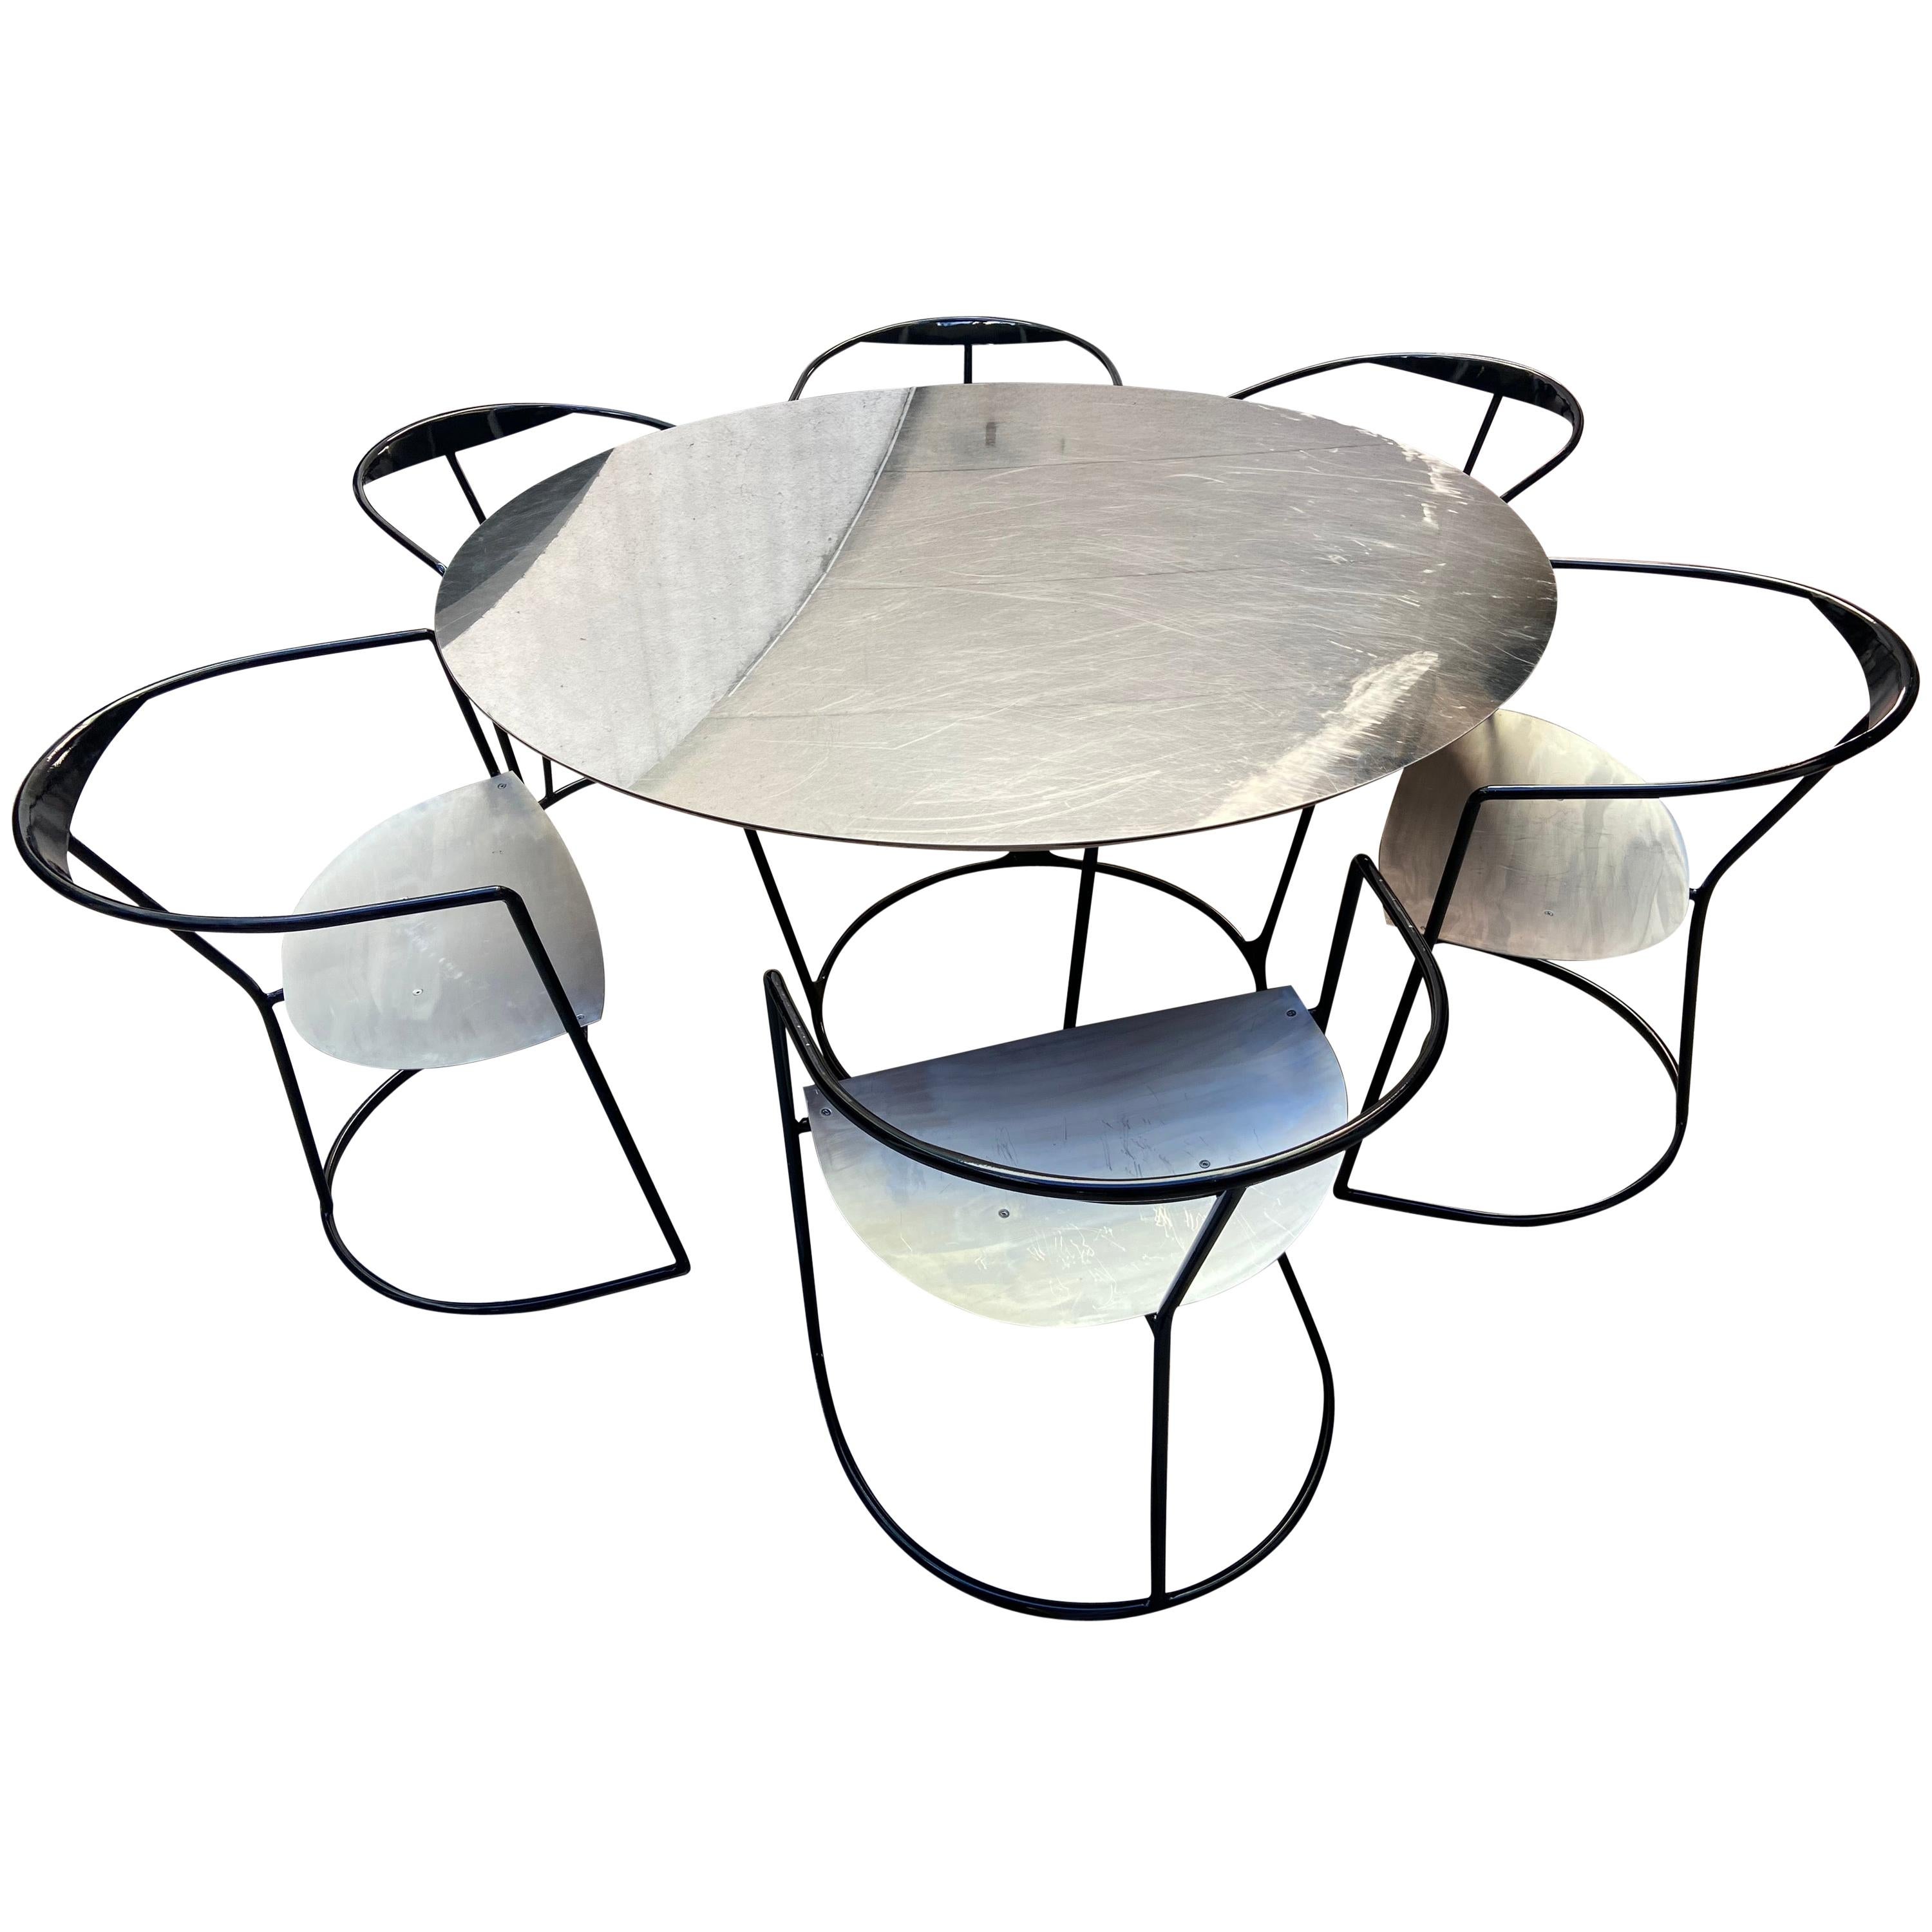 Pol Quadens, Set of Table and 6 Chairs, 2000